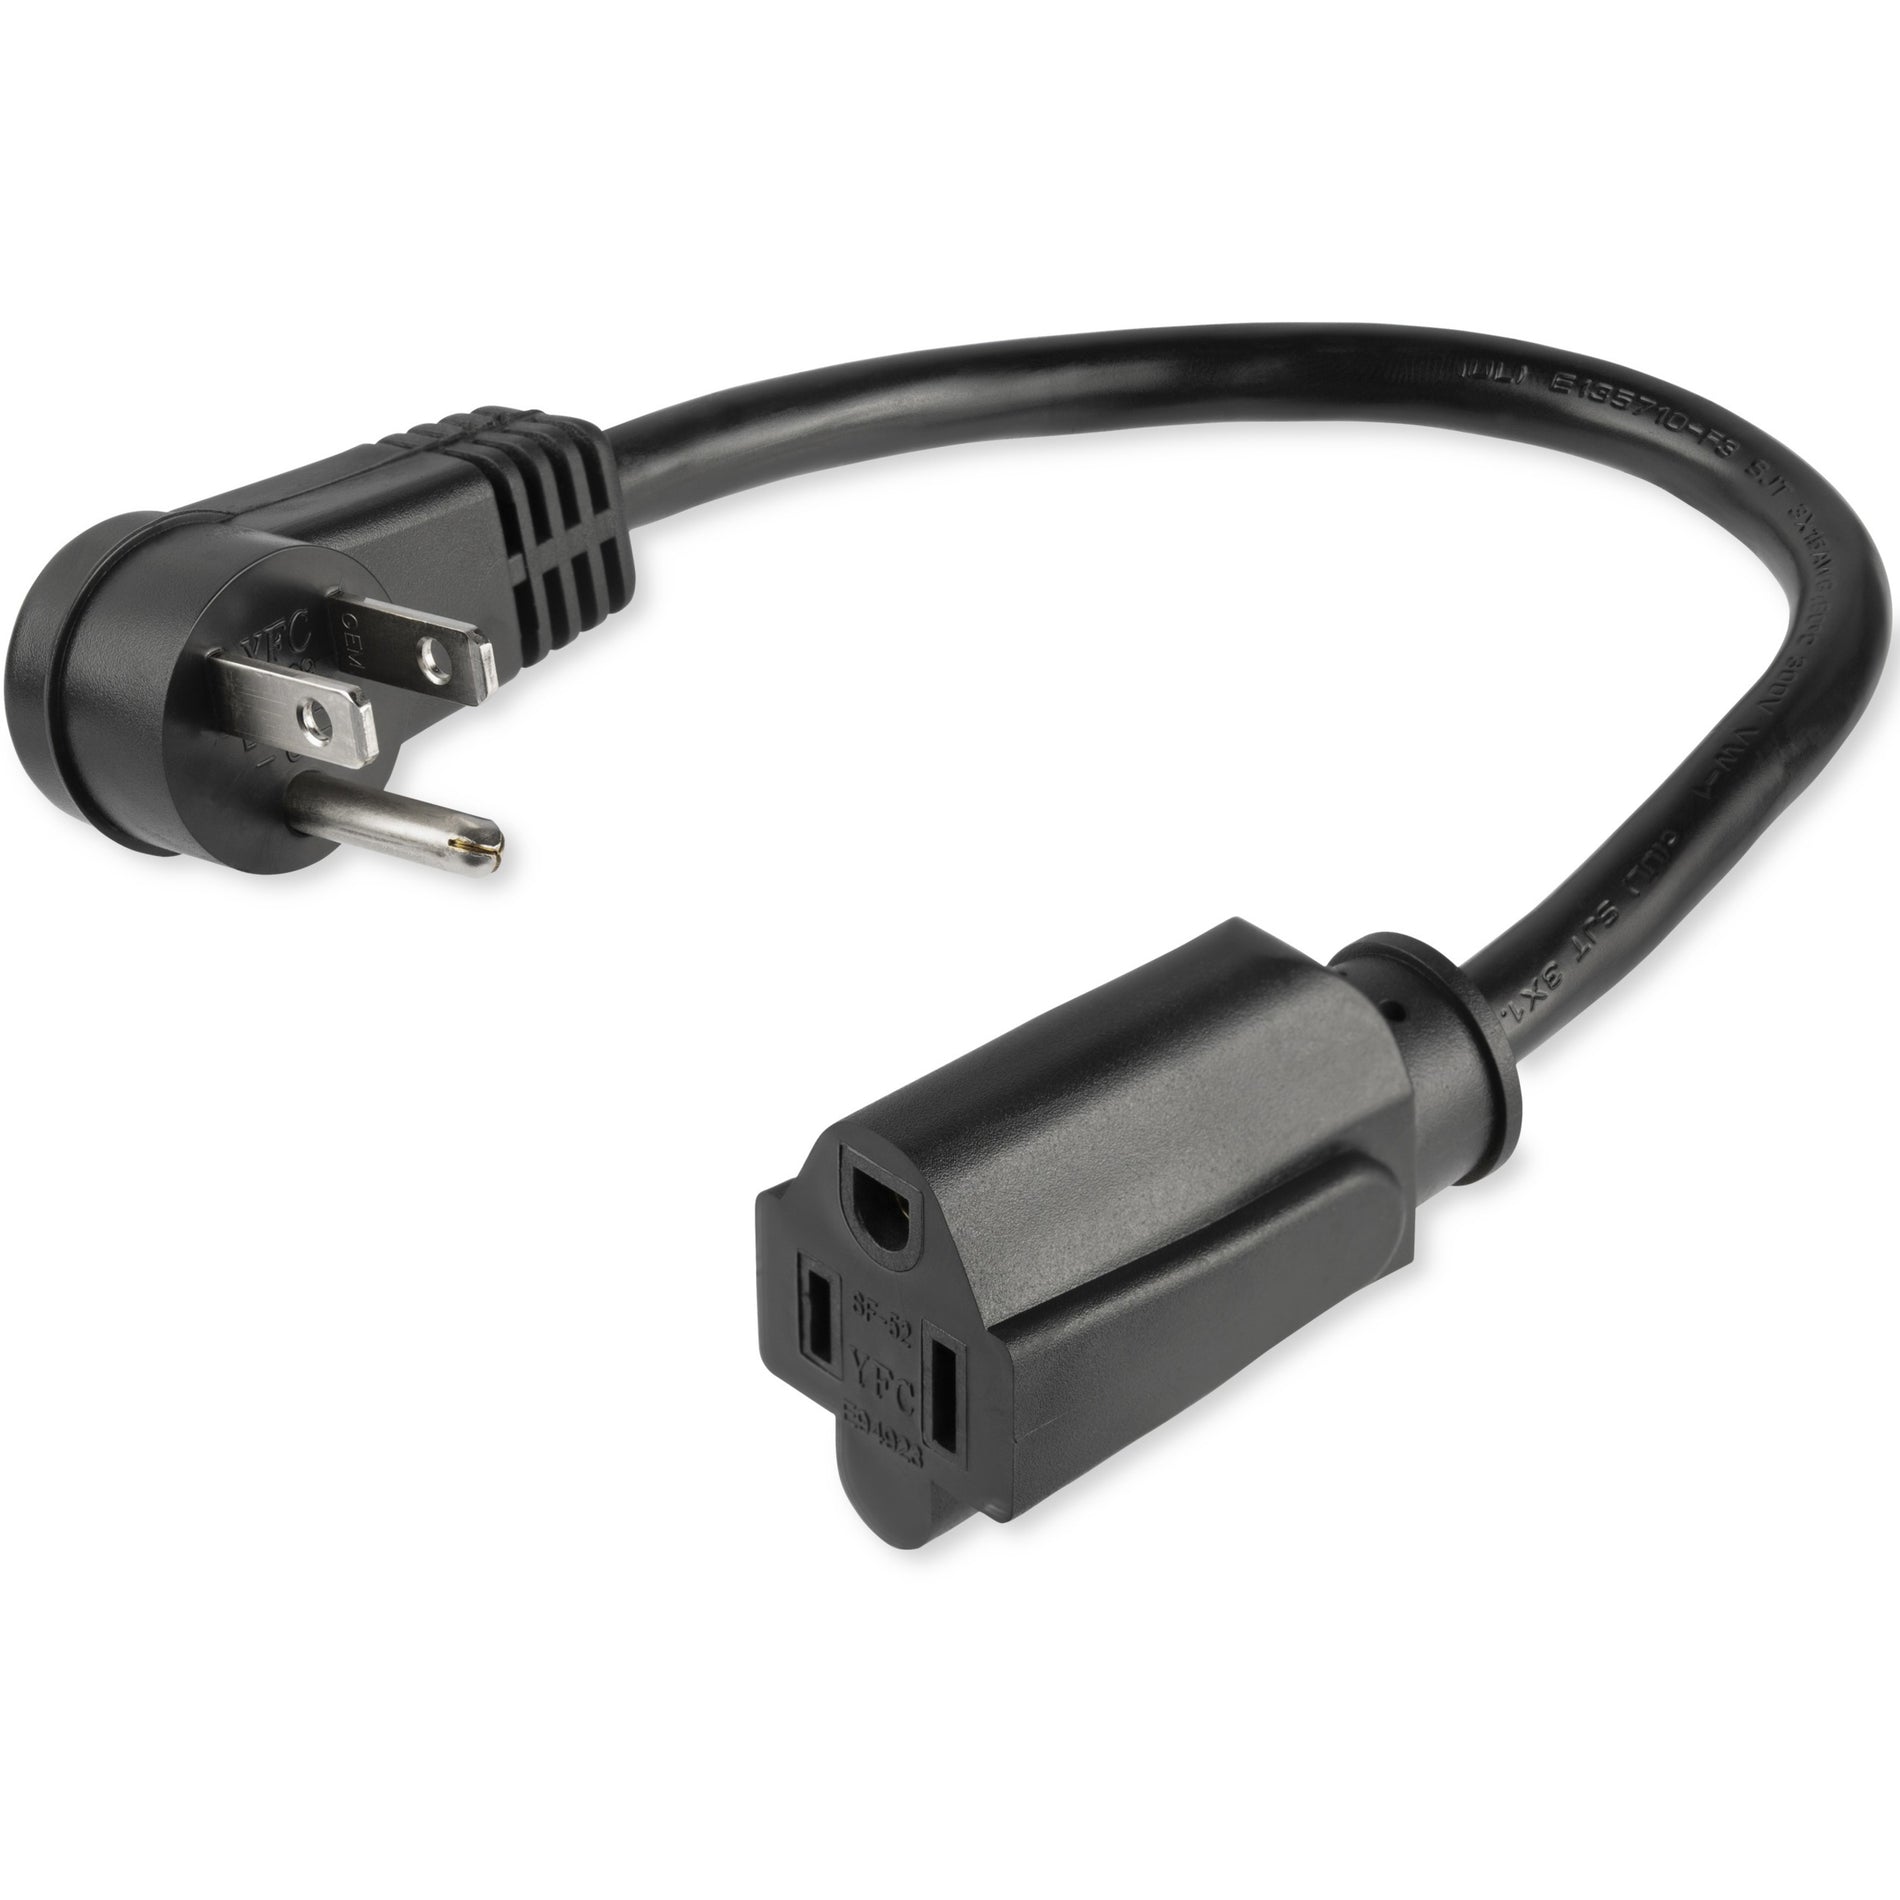 StarTech.com PAC101R1 Power Extension Cord 1 ft Flat Low Profile Right Angle Power Cable